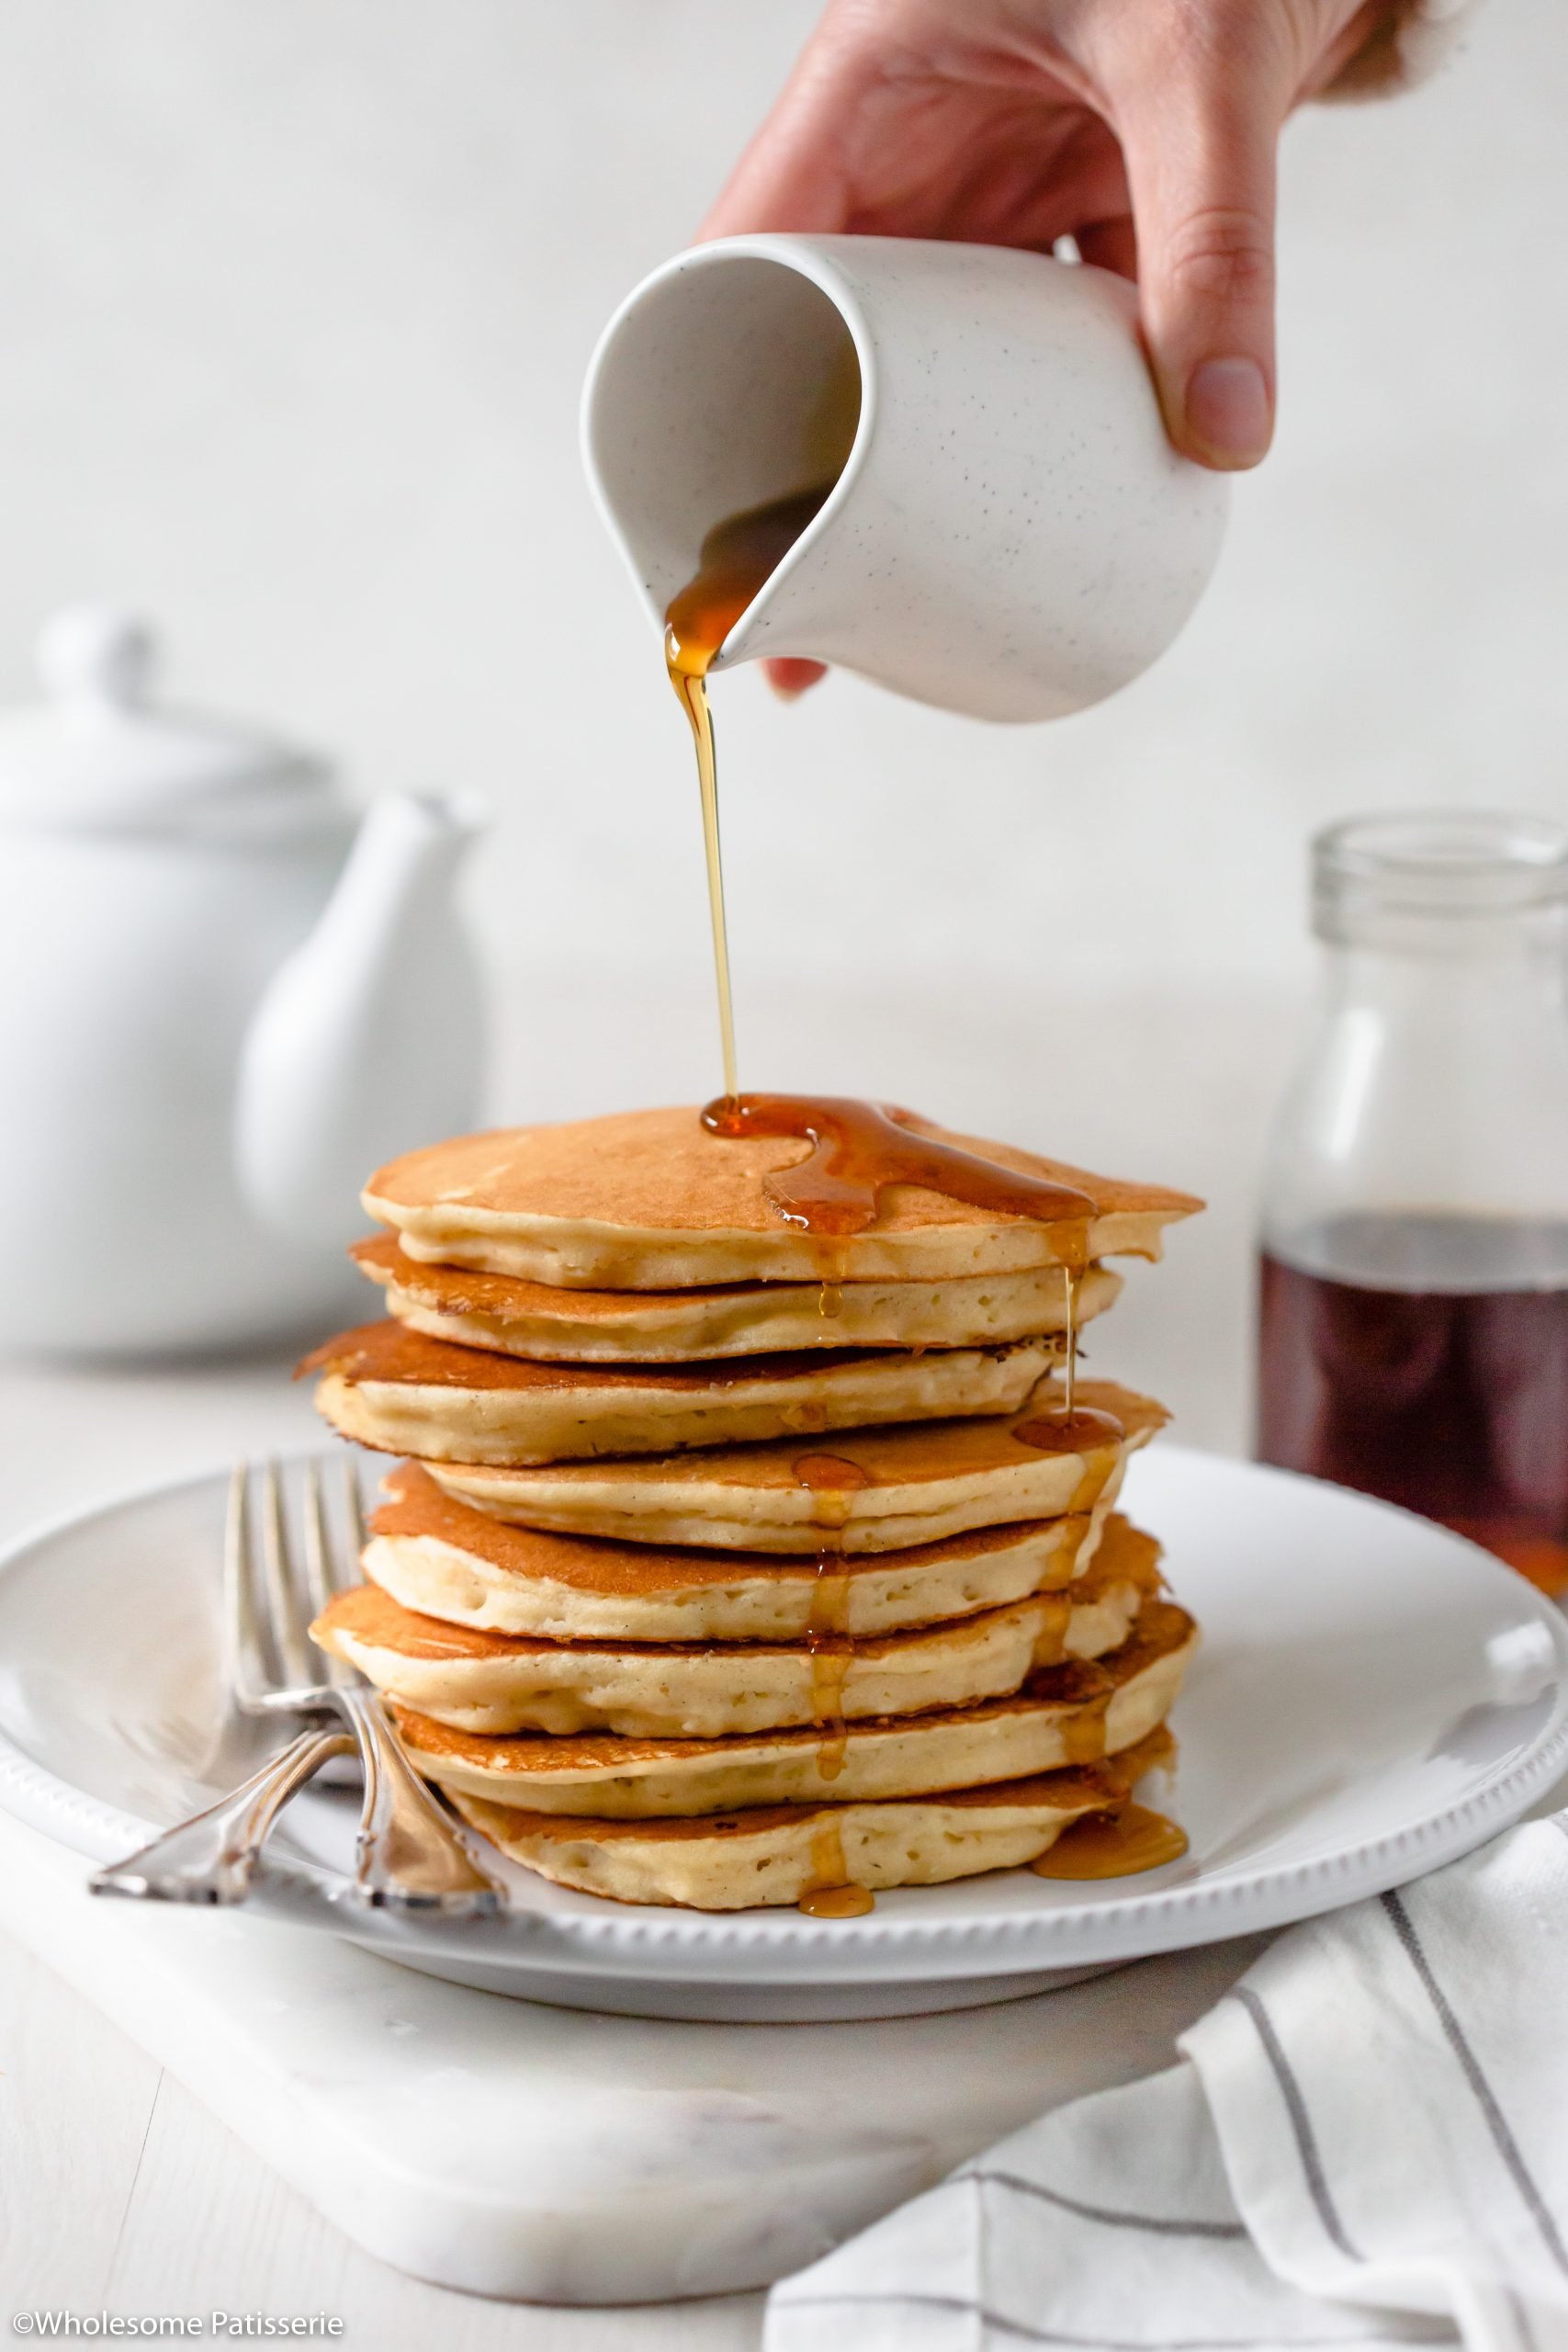 Drizzling maple syrup over the fluffy best pancakes